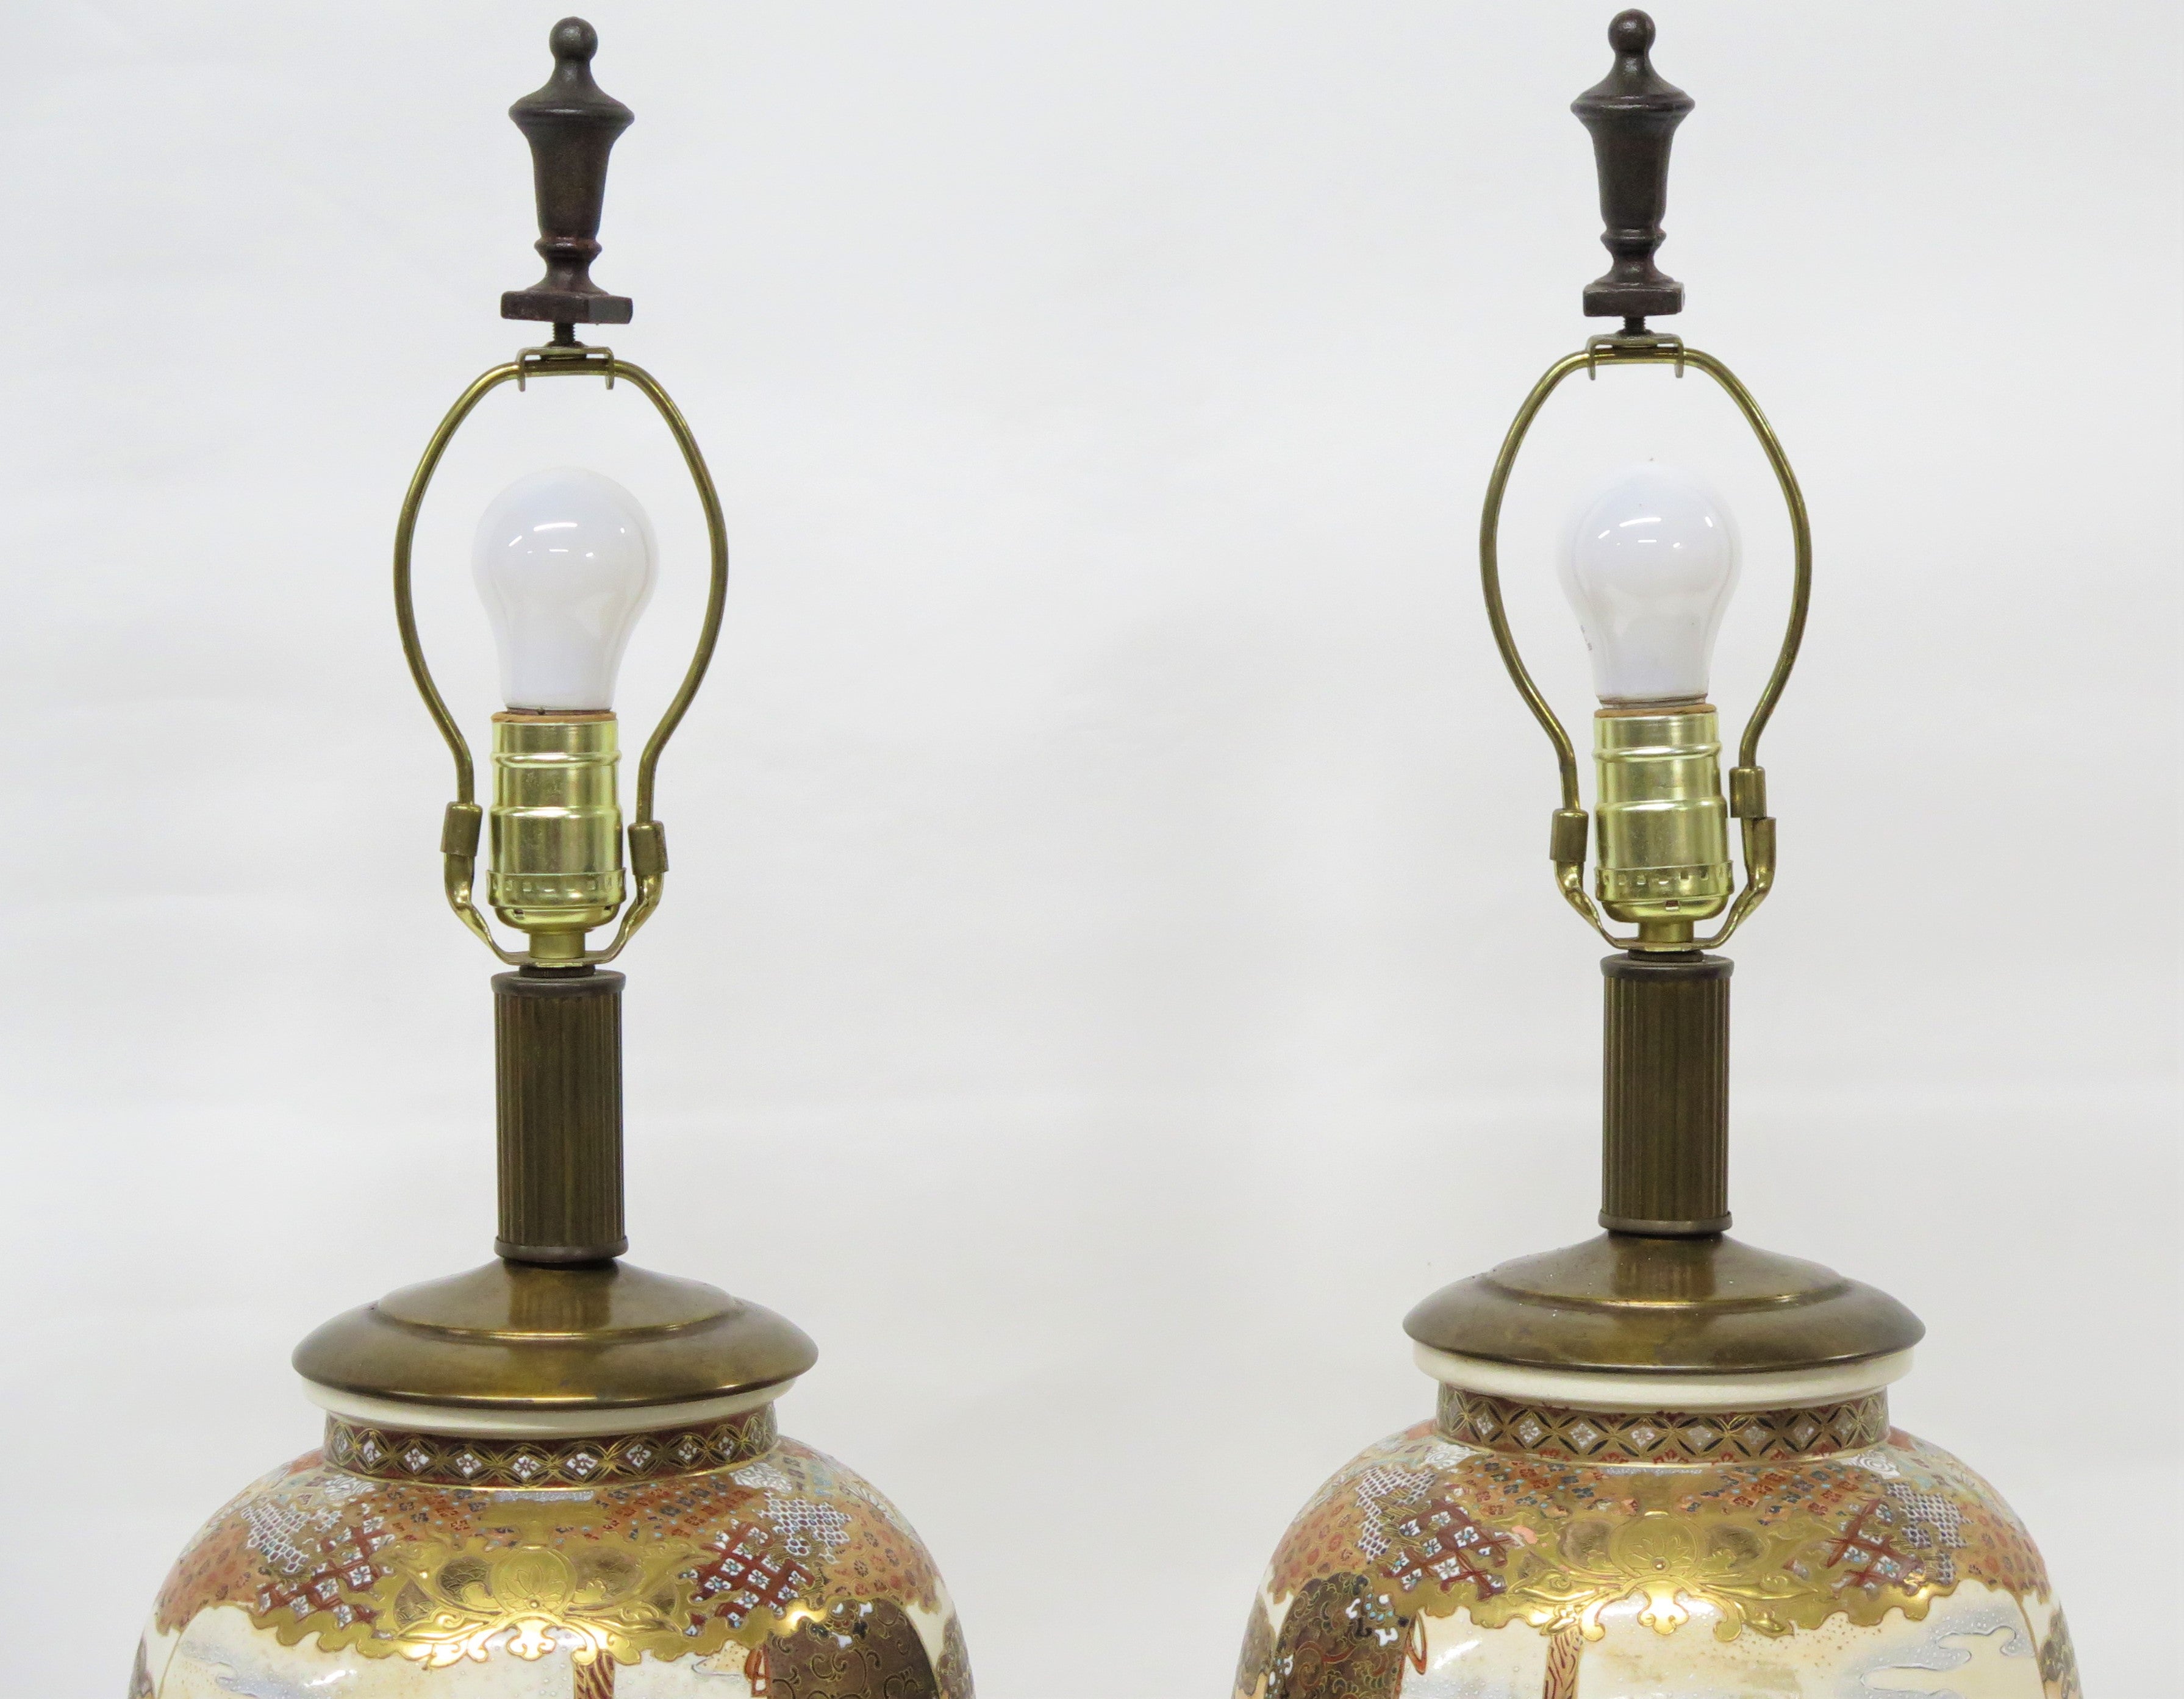 Pair of Japanese Satsuma Vases with Bronze Mounts as Custom Lamps